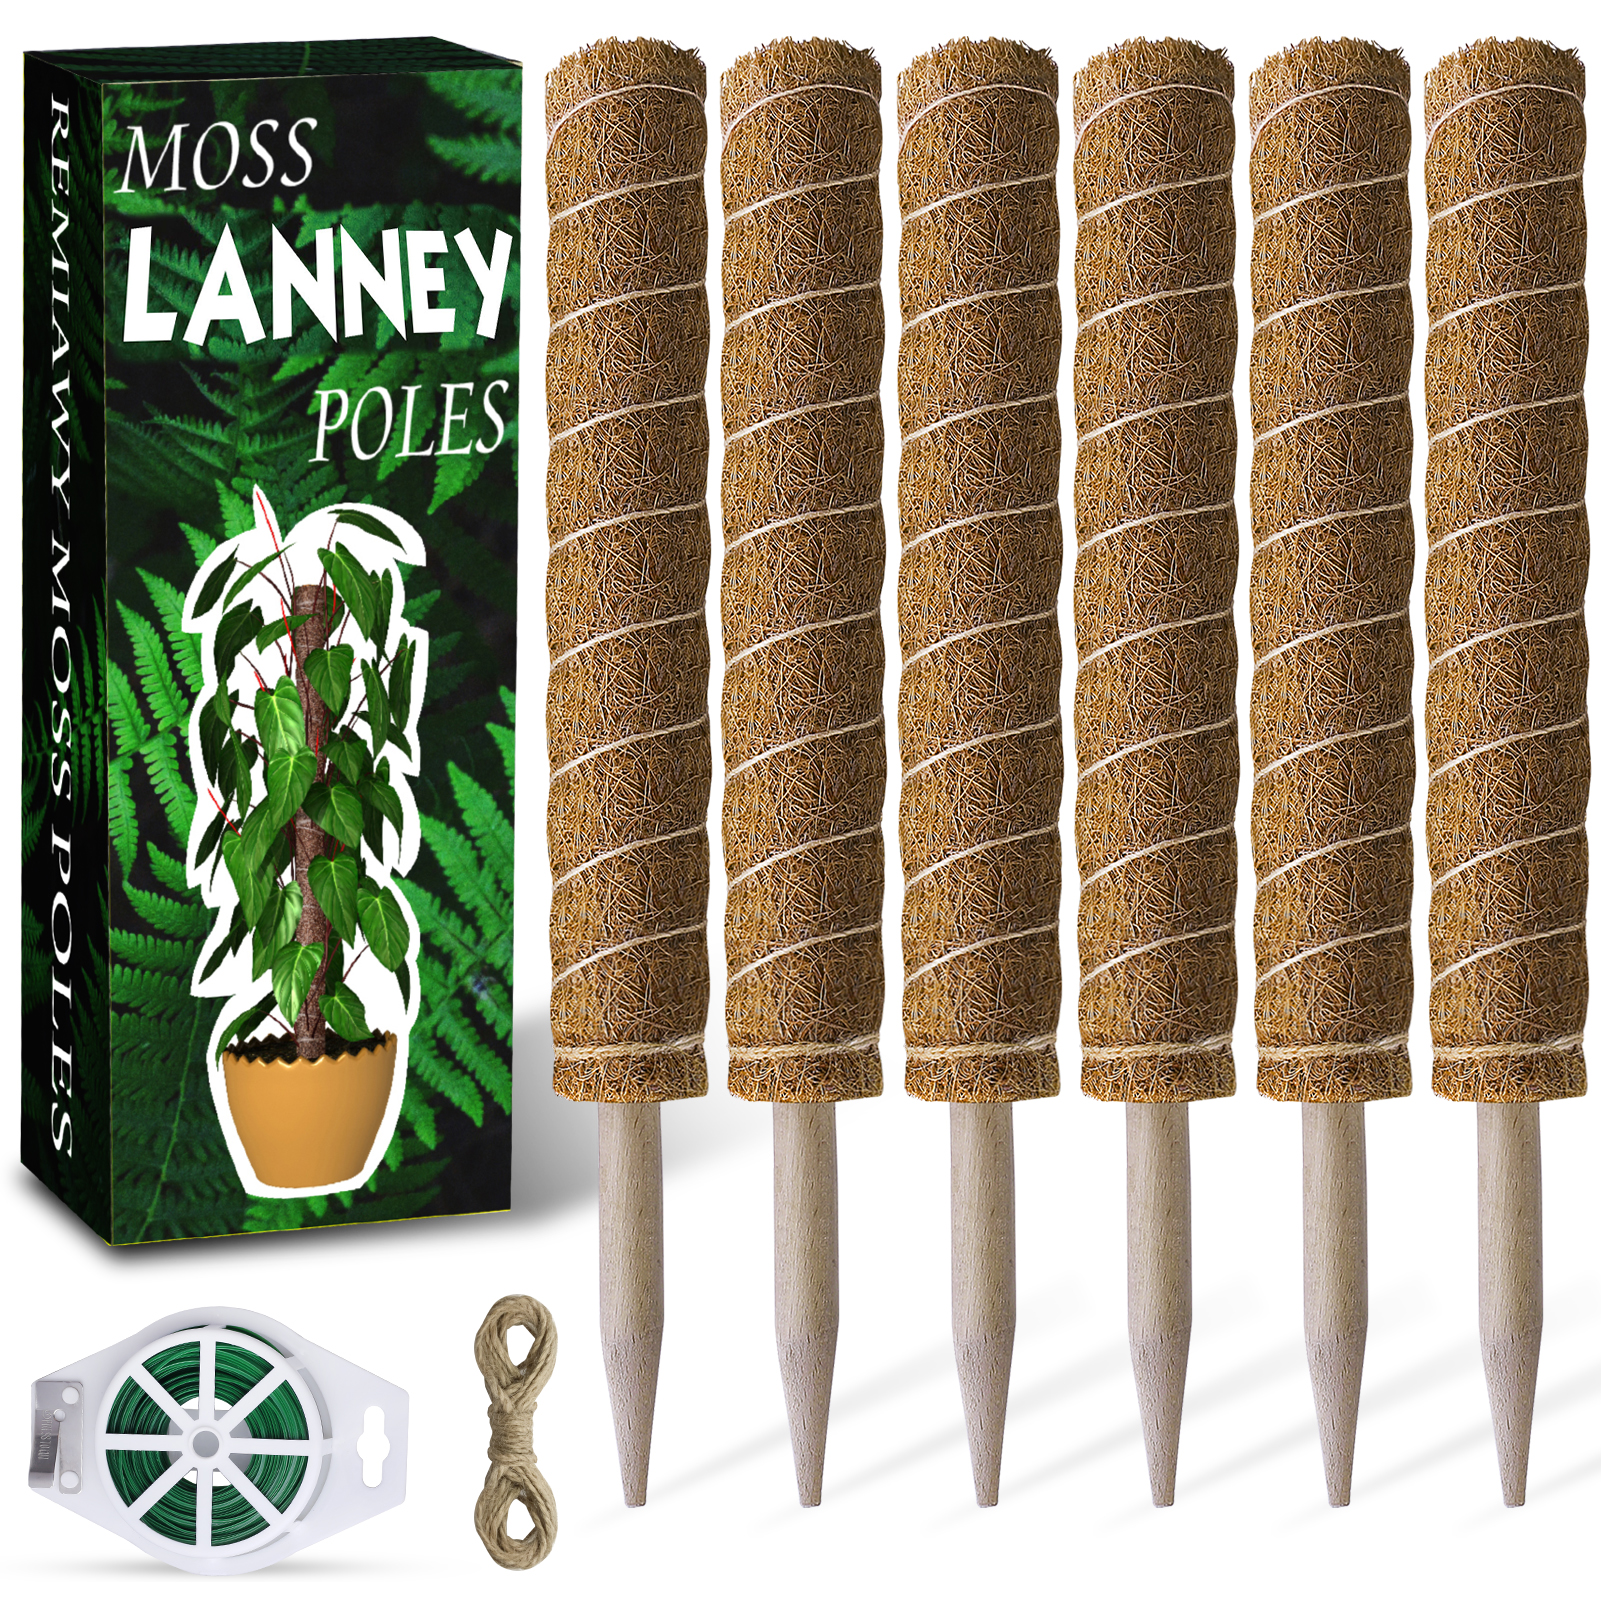 Moss Pole 68 Inch, 6 Pack Plant Moss Pole for Plants Monstera Pole, 15.6 Inch Coir Totem Pole for Climbing Plants Support Extension Indoor Moss Sticks with 65 Feet Garden Twist Tie